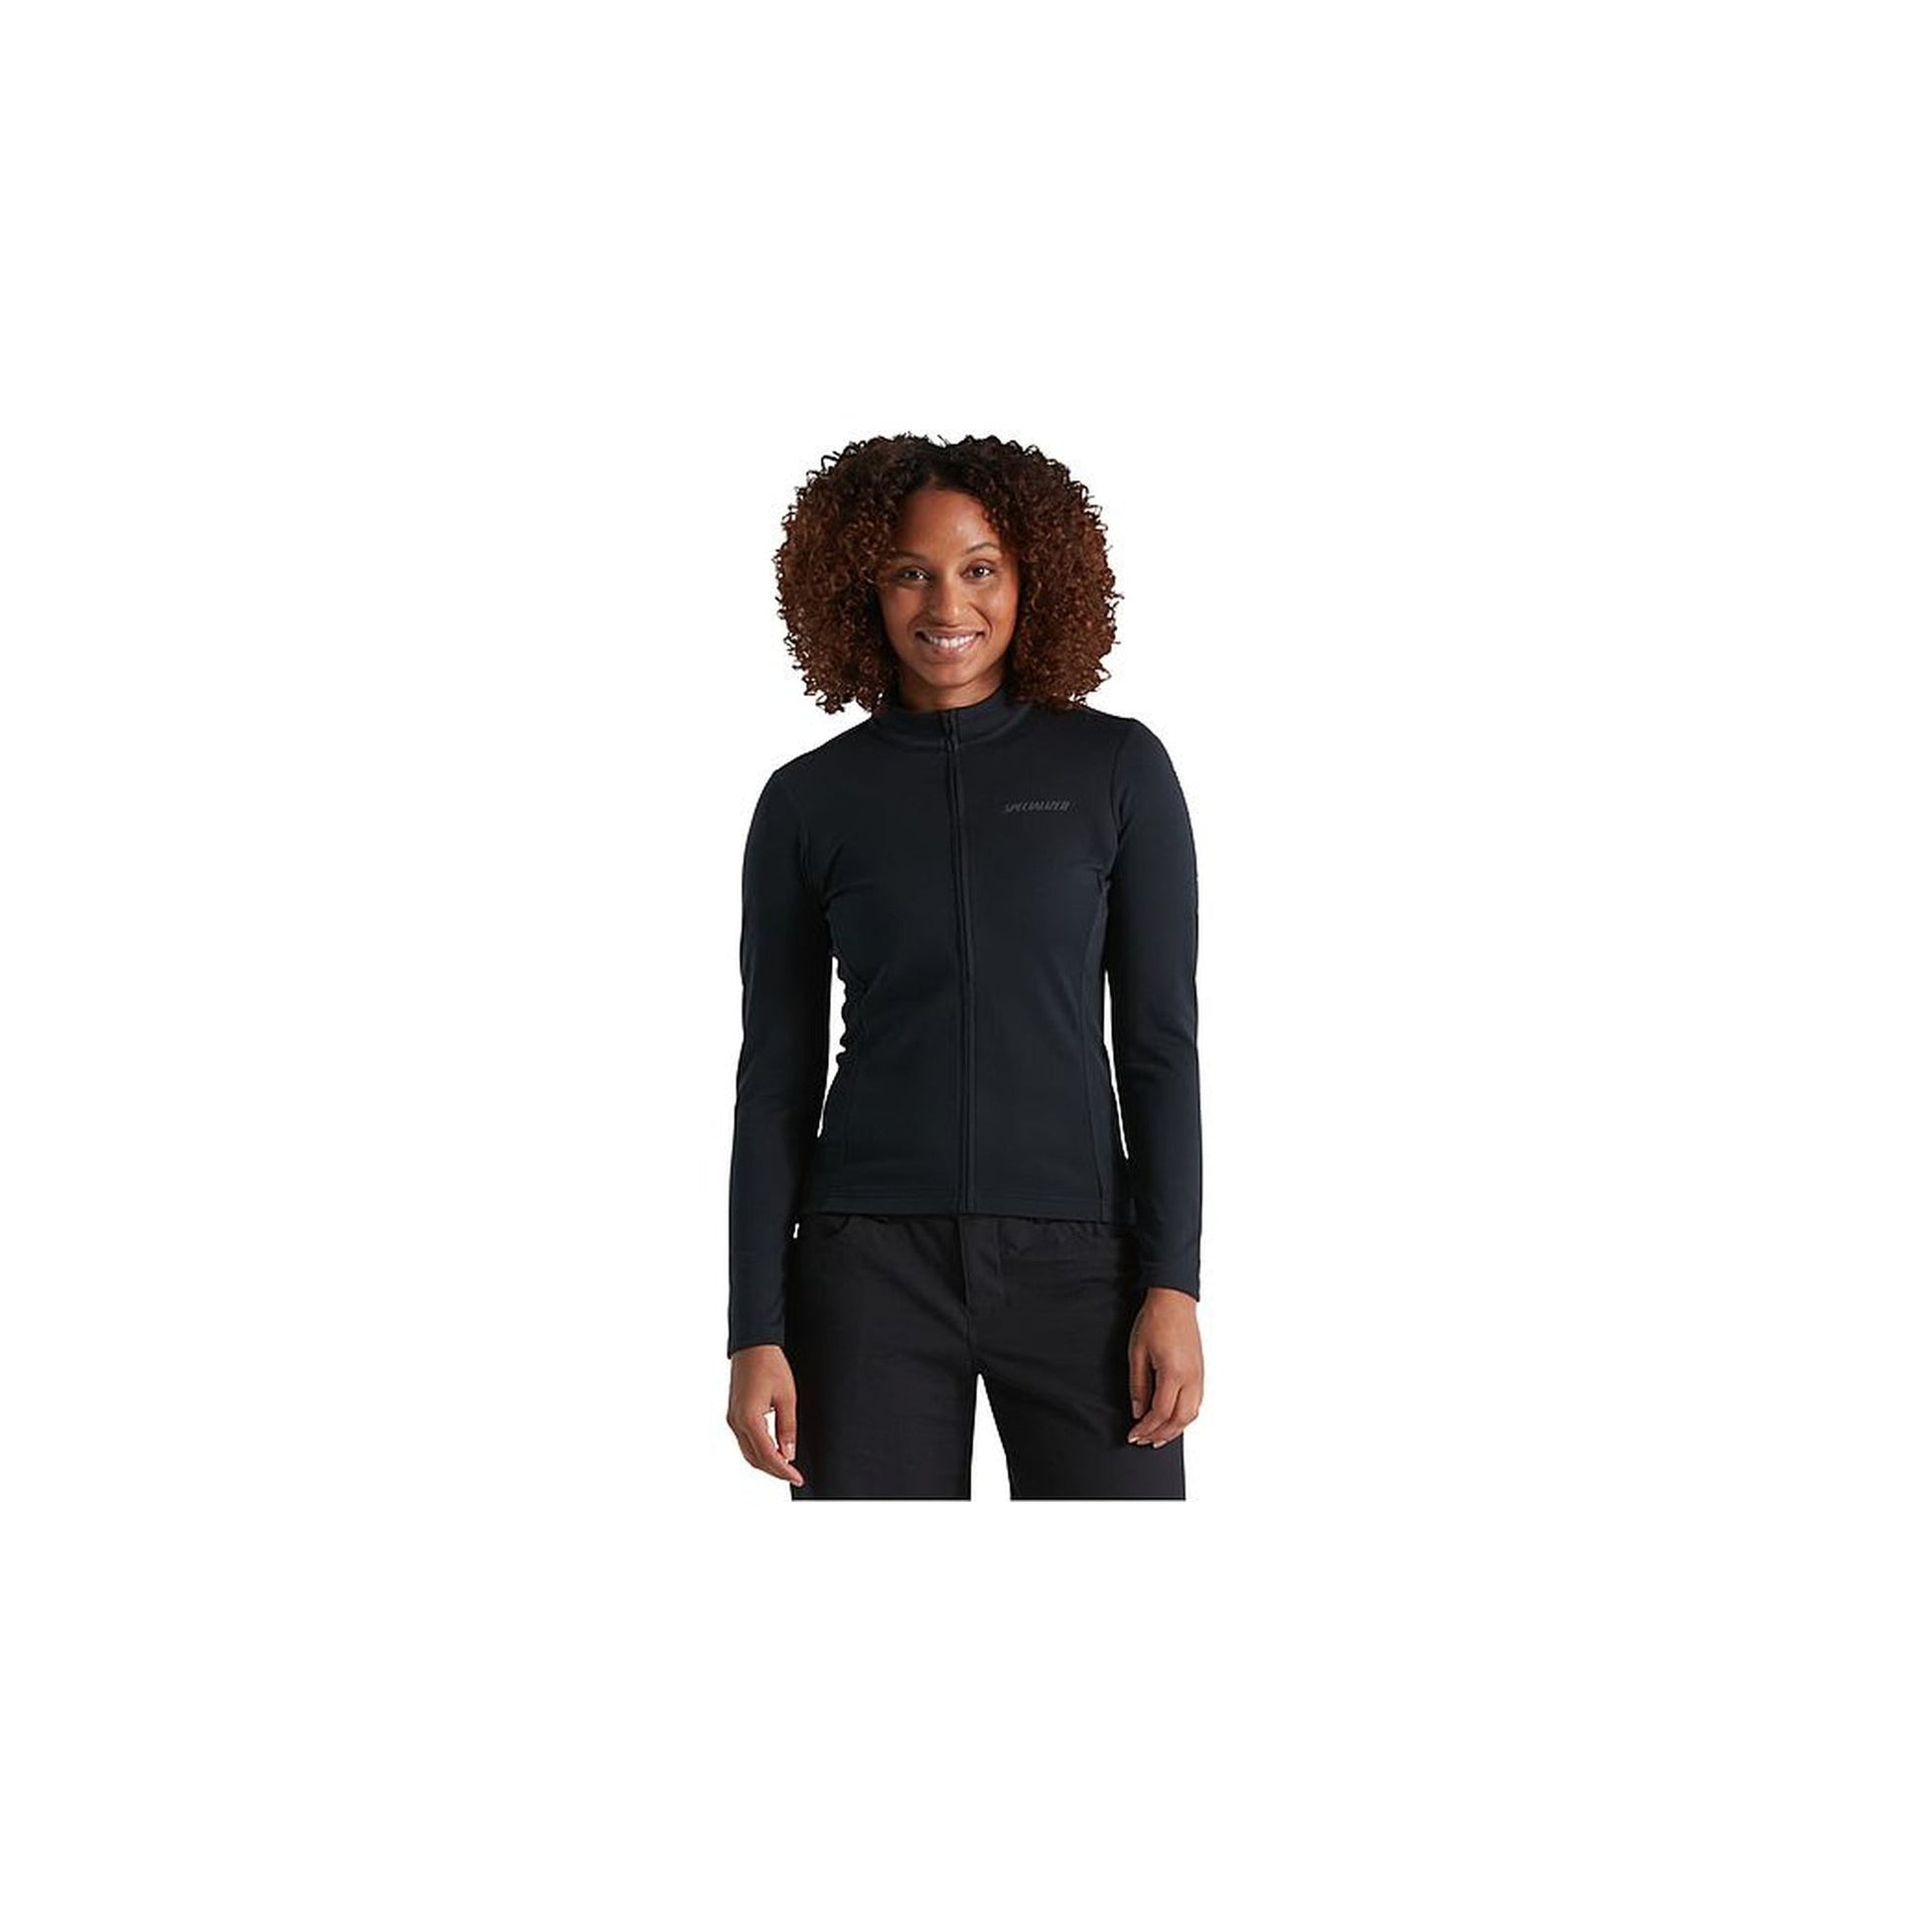 Women's RBX Classic Long Sleeve Jersey-Cycles Direct Specialized